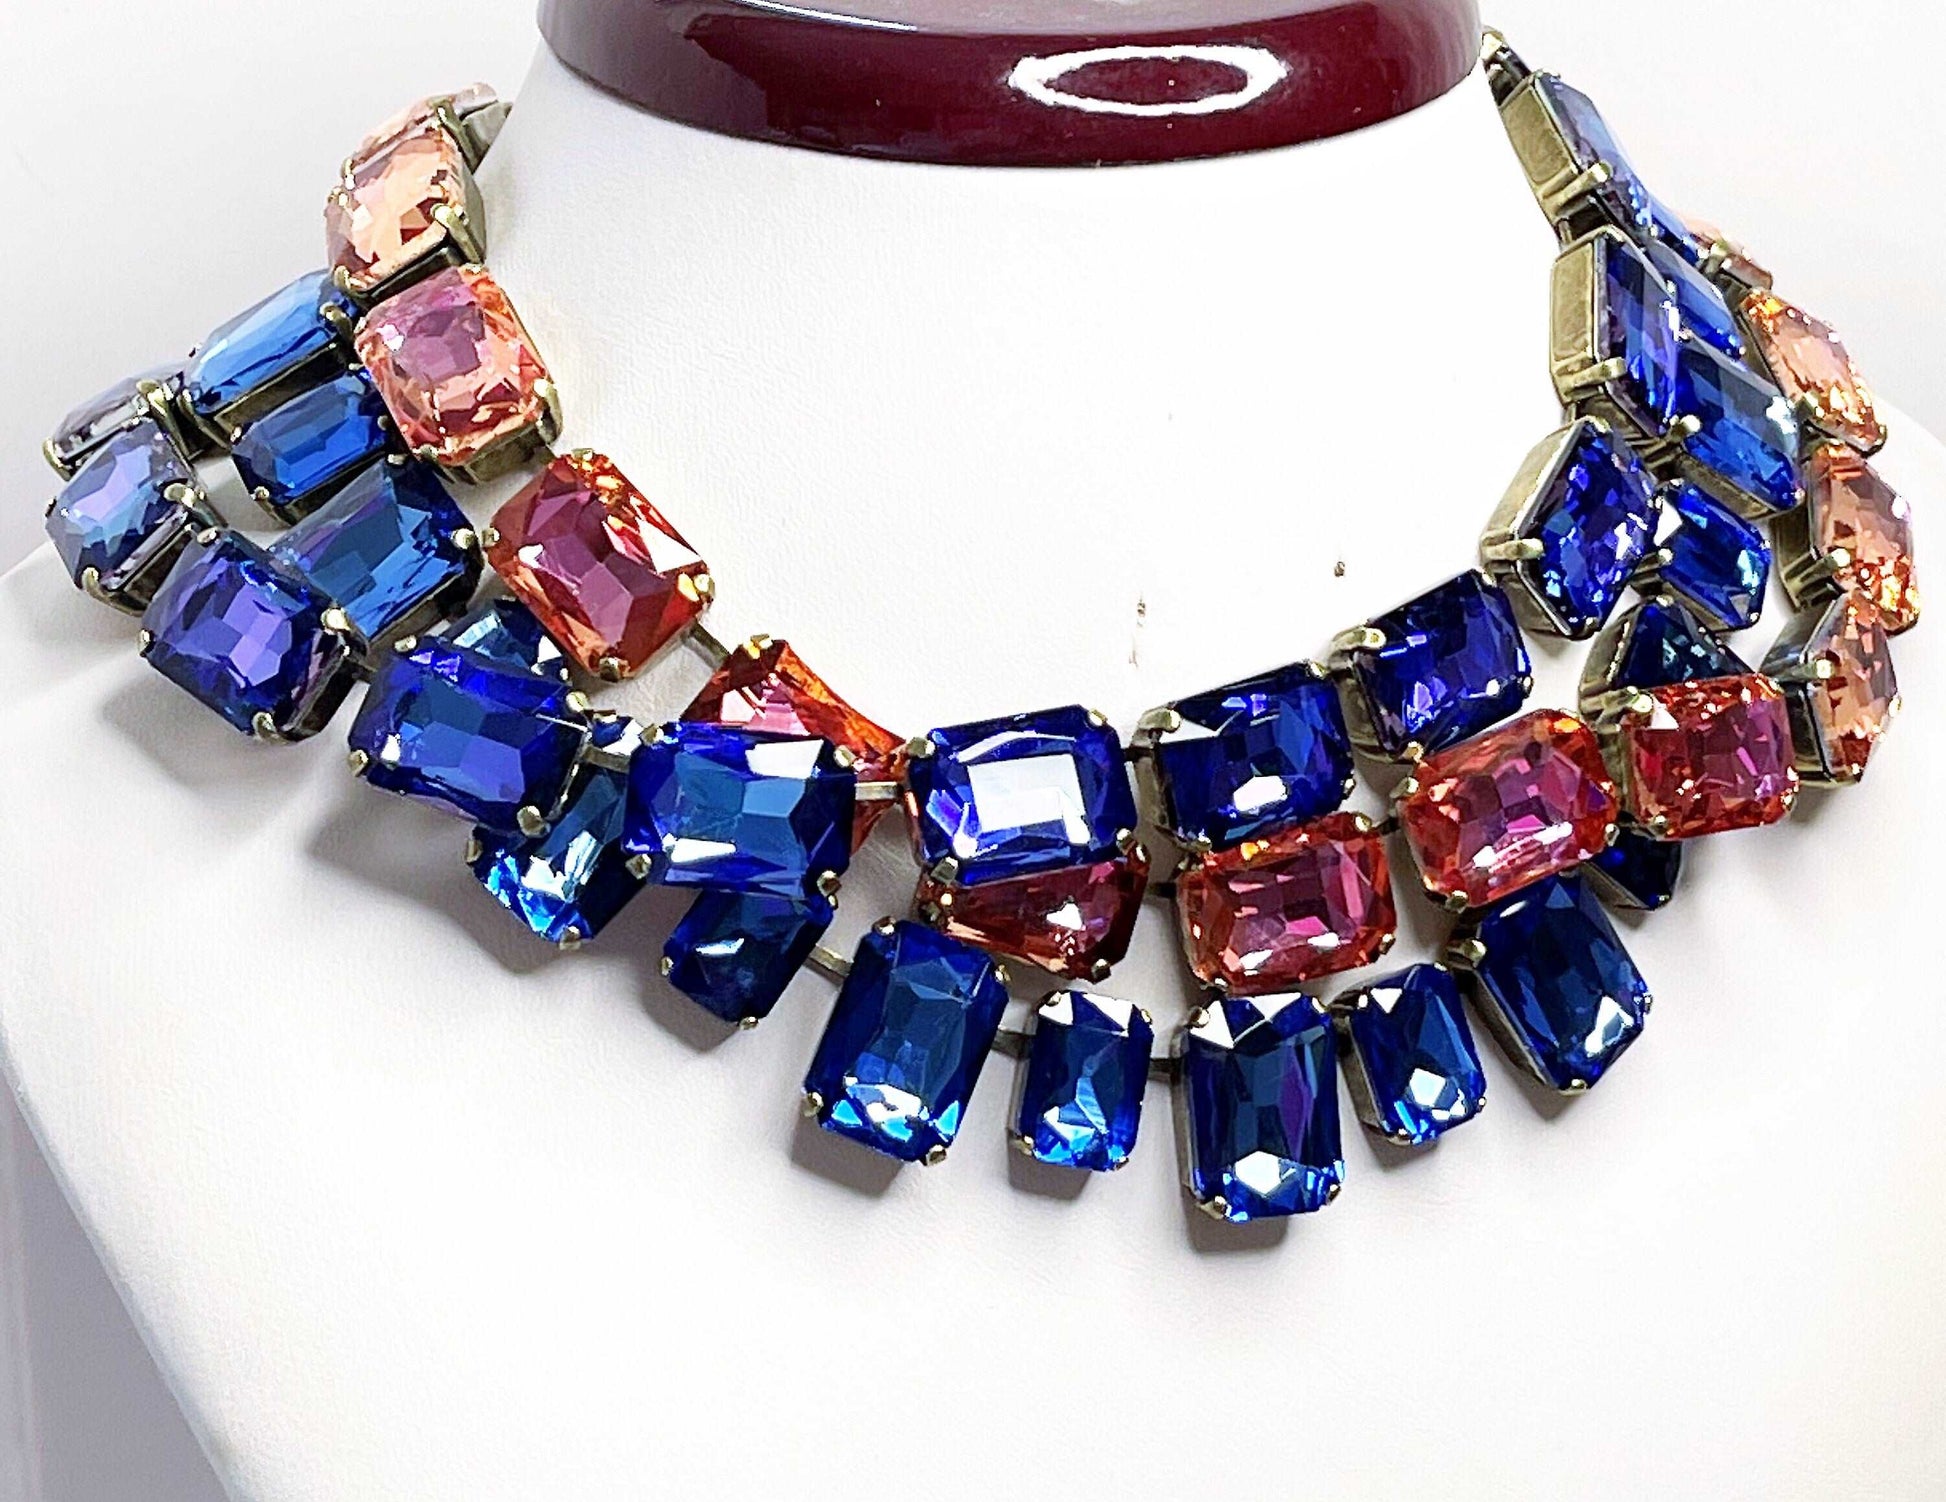 Anna Wintour Necklace, Blue Georgian Collet, Peach Crystal Choker, Riviere Necklace, Statement Necklace, Layering ChokersBlue Peach Crystal Georgian Collet Chokers | Anna Wintour Style | Riviere Necklace | Statement Necklace